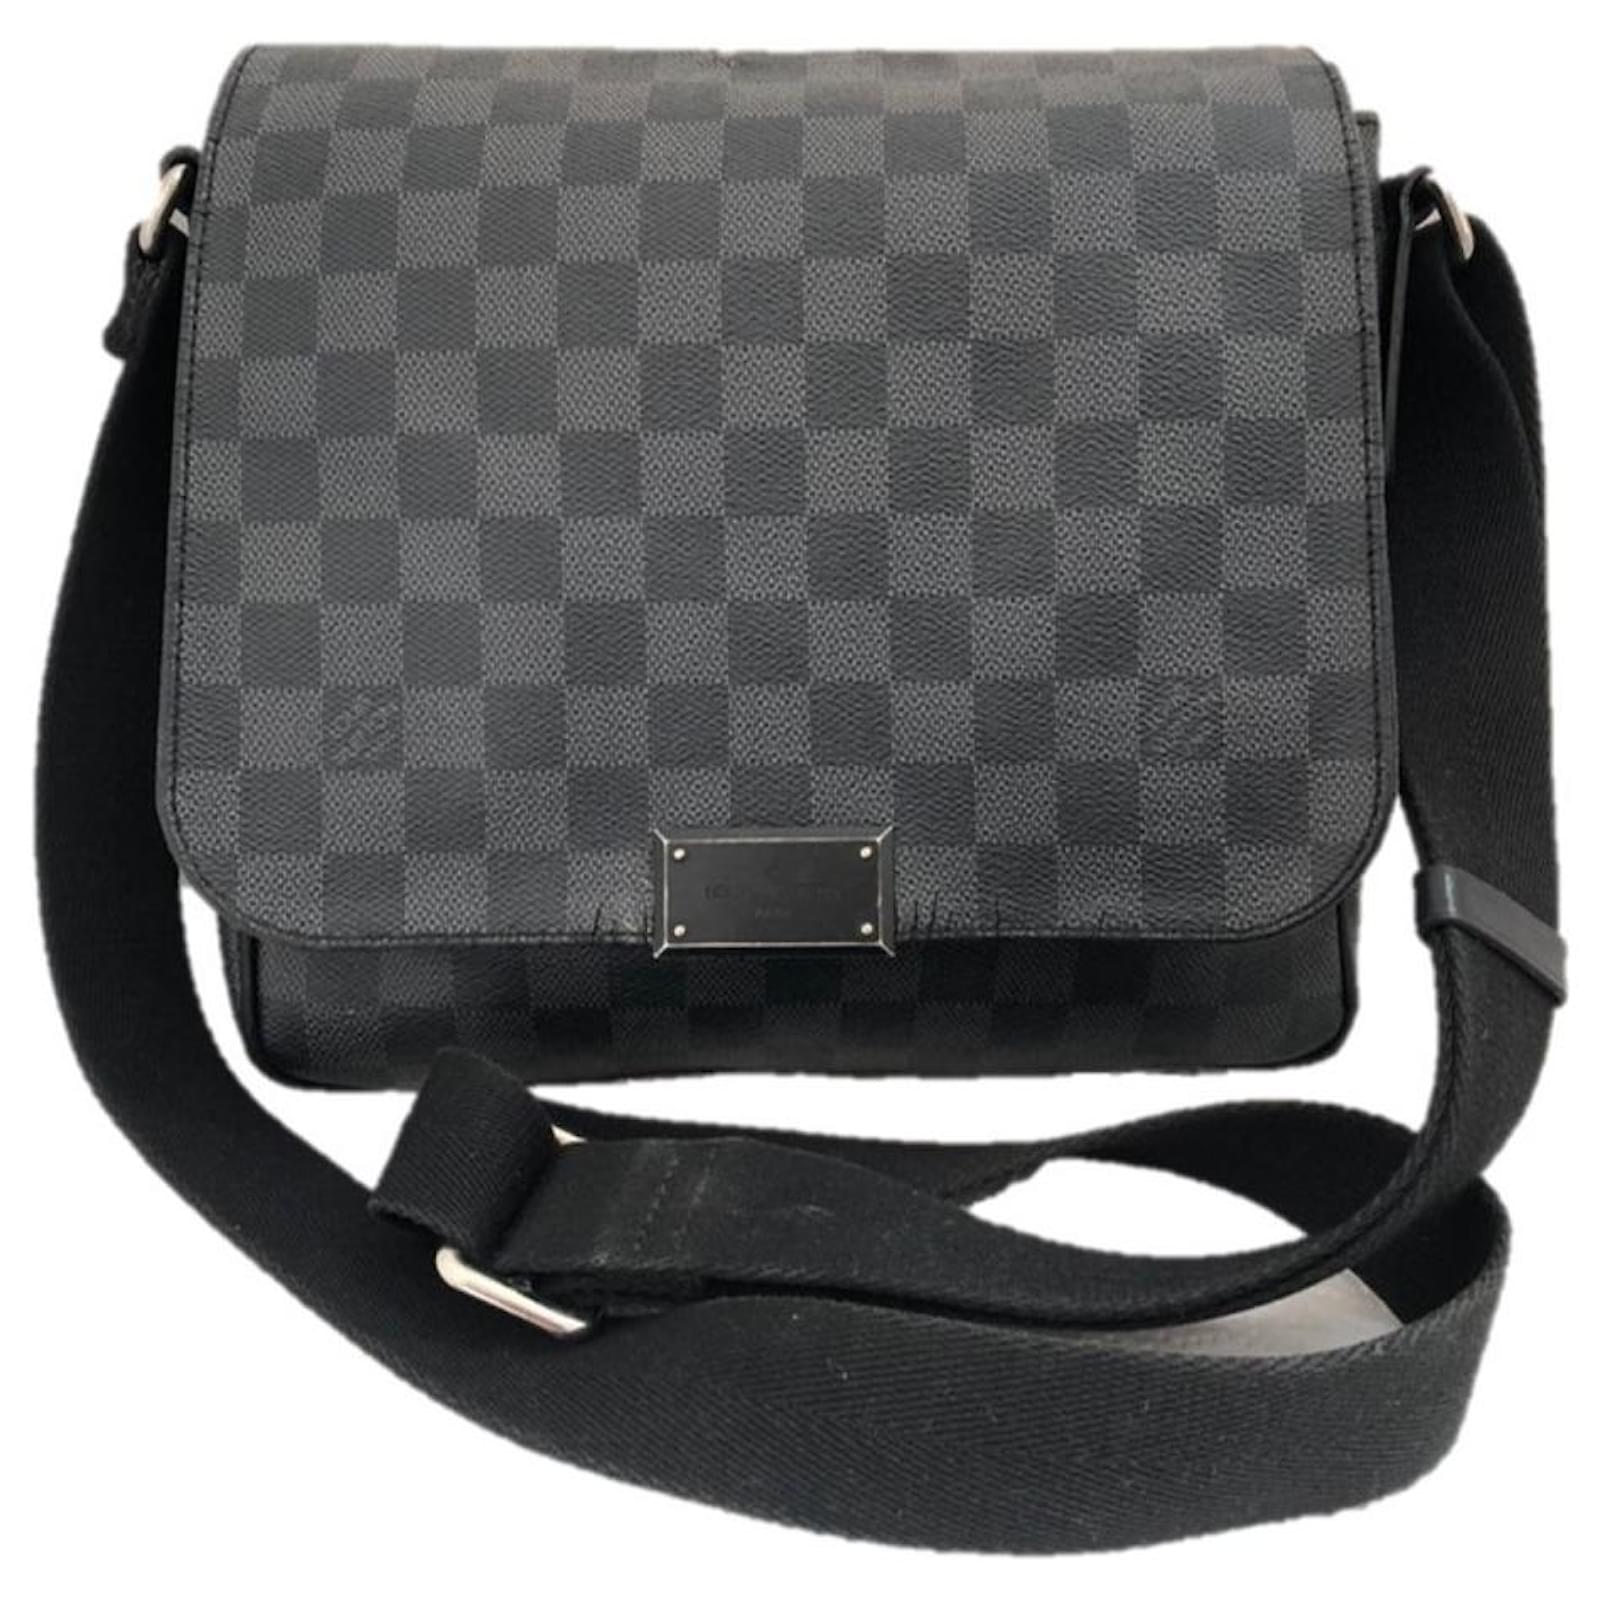 District leather bag Louis Vuitton Black in Leather - 31517848